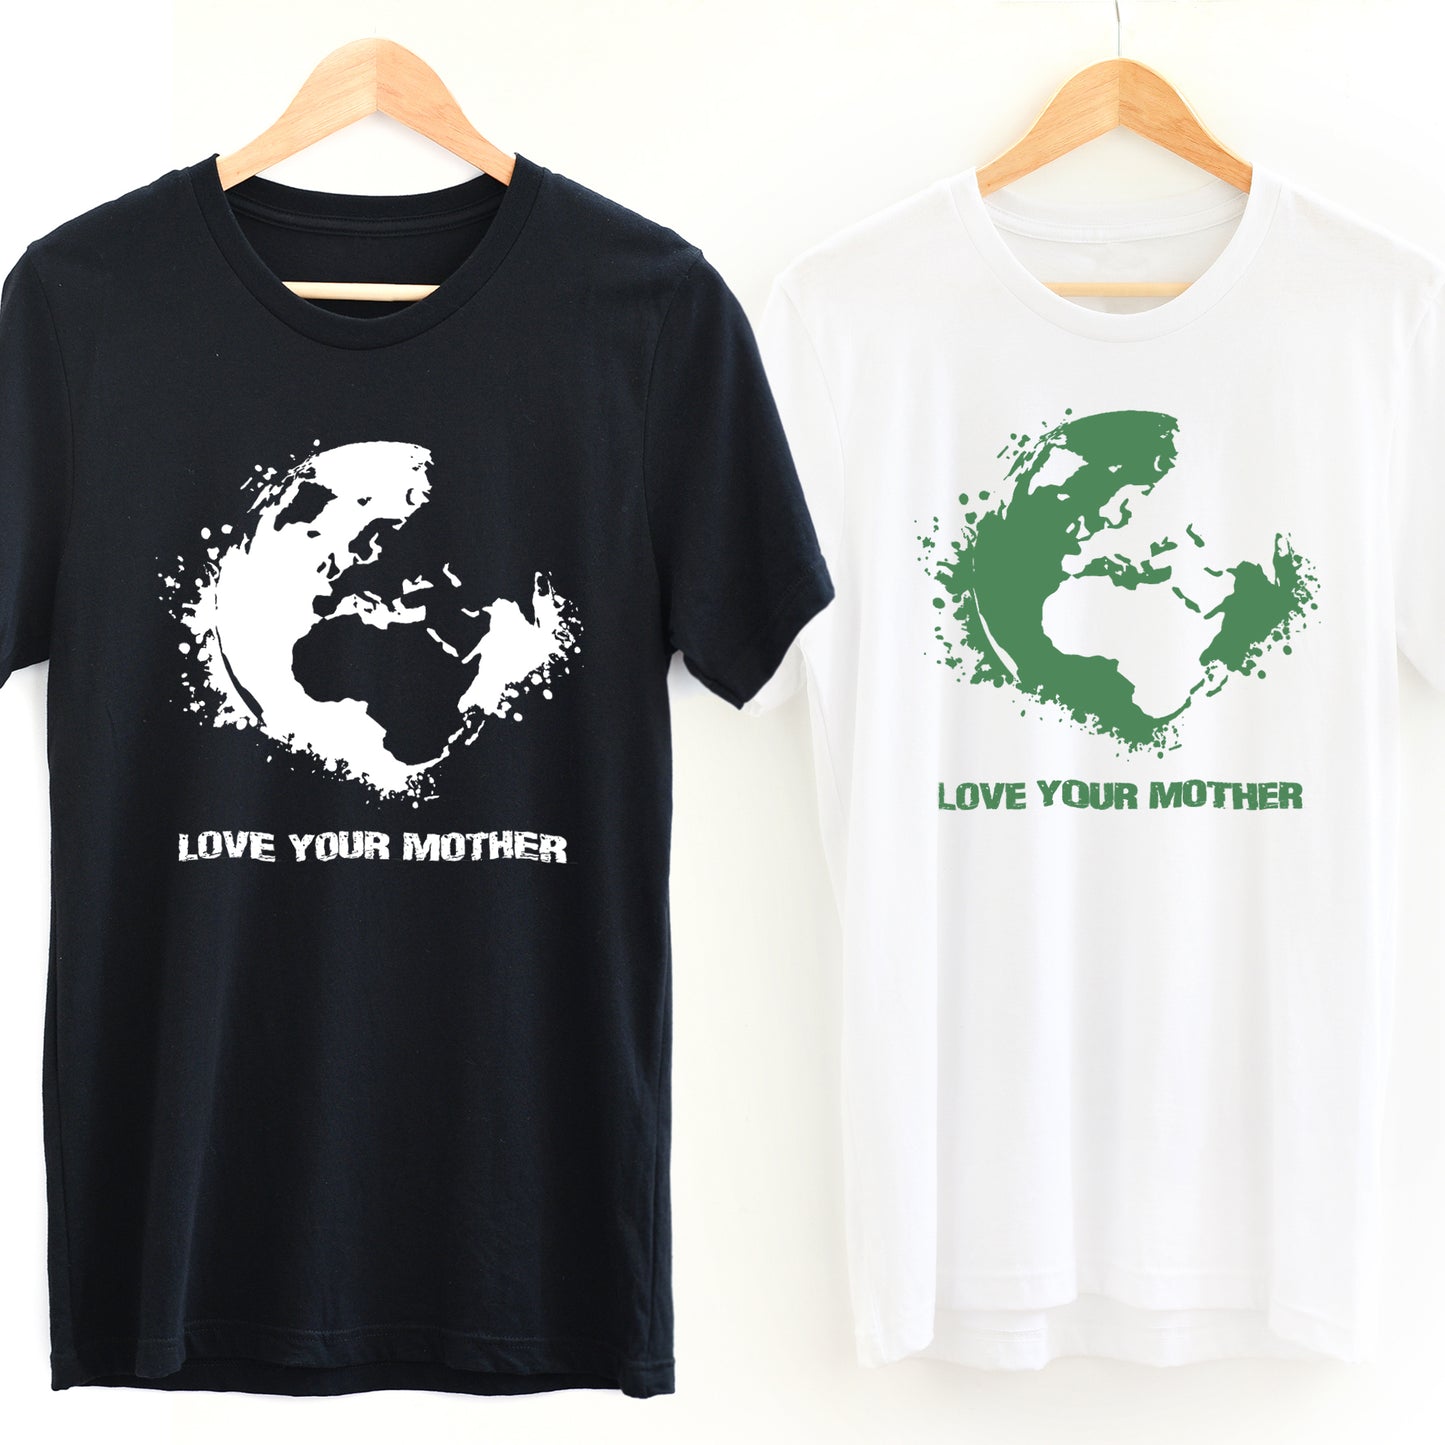 Black *Organic* Love Your Mother Earth Short-Sleeve Tee with white design and White *Organic* Love Your Mother Earth Short-Sleeve Tee with green design - Connected Clothing Company - 10% of profits donated to the Environmental Defense Fund